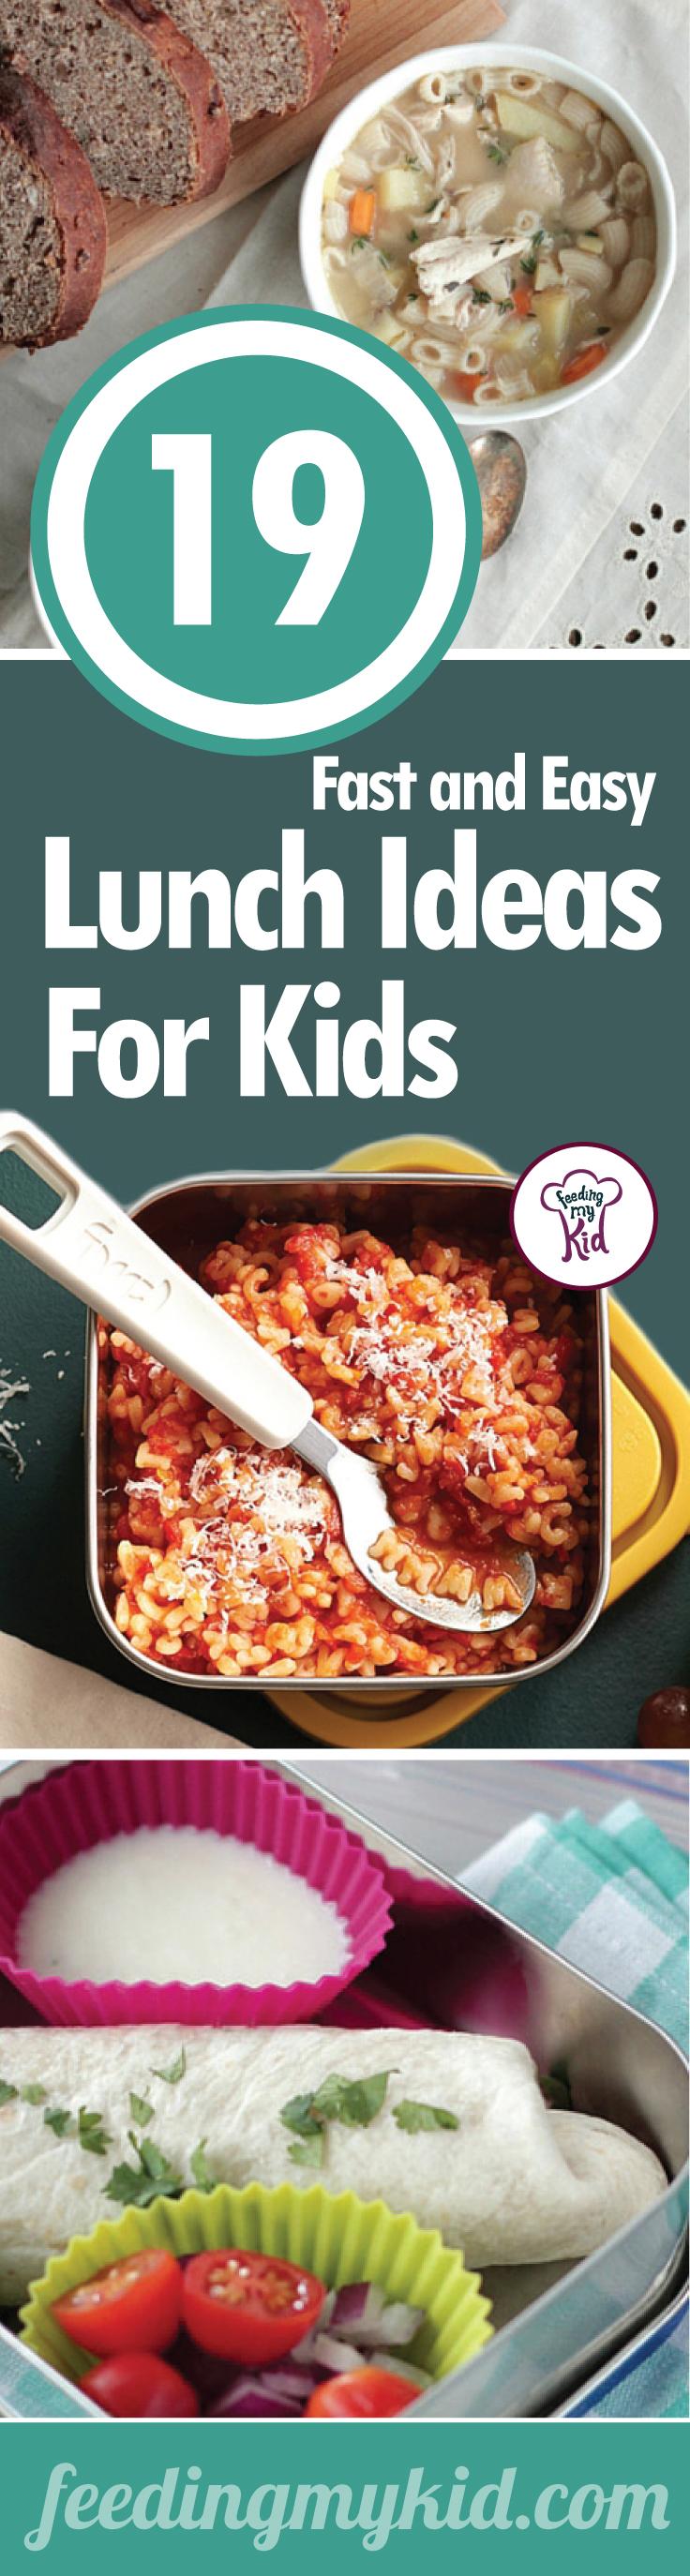 19 Fast and Easy Lunch Ideas For Kids - We felt it was our duty to share these pin-worthy recipes for your family. Here are 19 fast and easy lunch ideas for kids that are a breeze to make and a pleasure to consume!